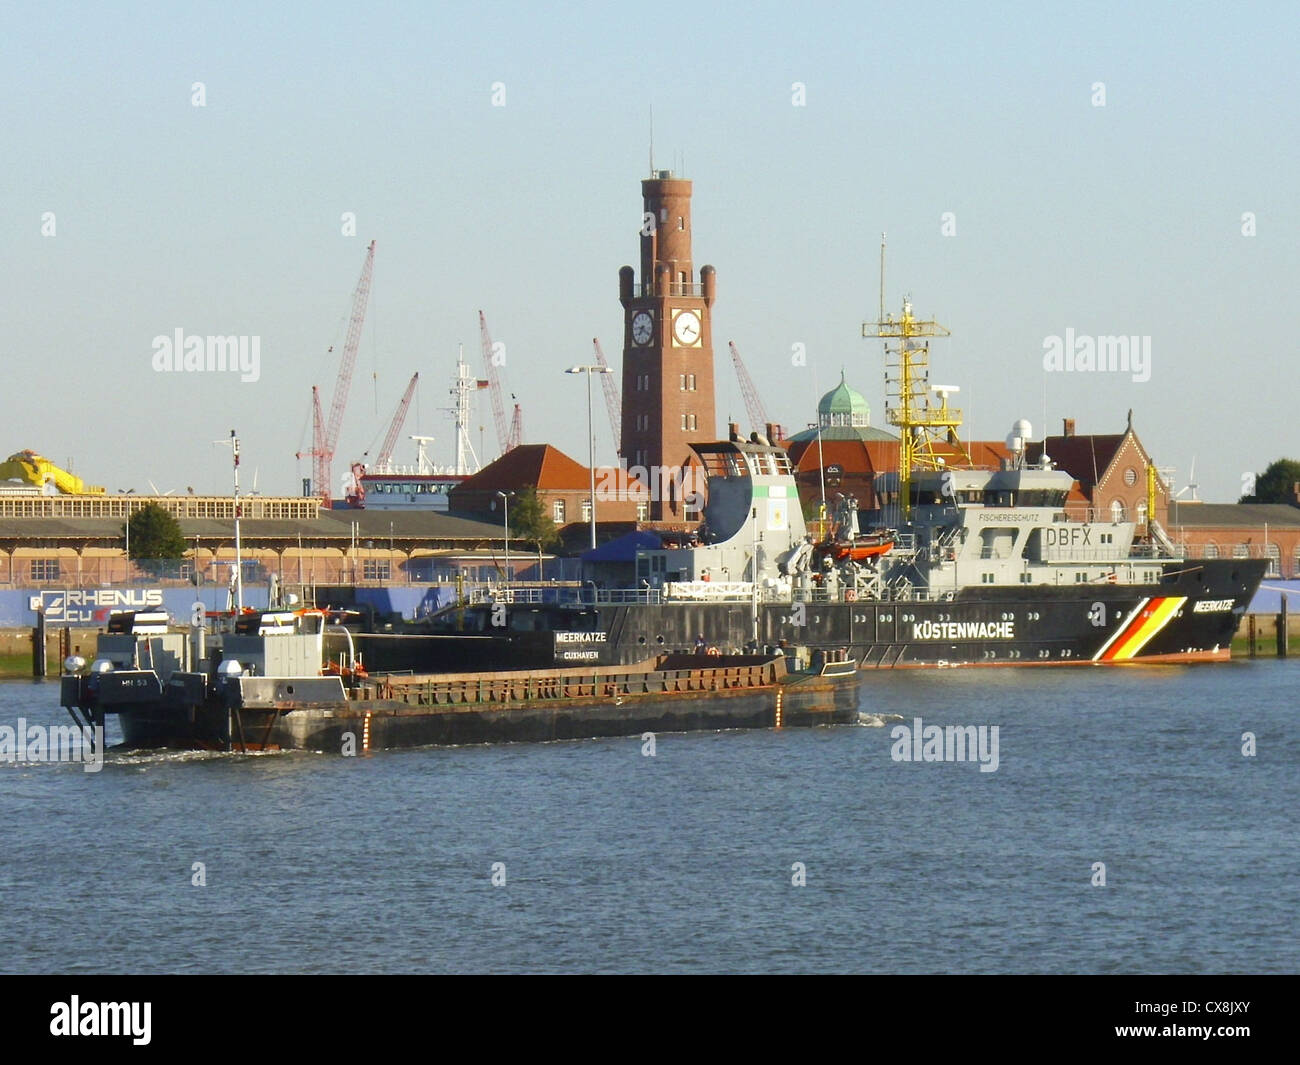 The self-propelled hopper barge '''HH 53''' (MMSI 211247310) and the fishing control vessel '''Meerkatze''' in the port of Cuxhaven, Germany Stock Photo